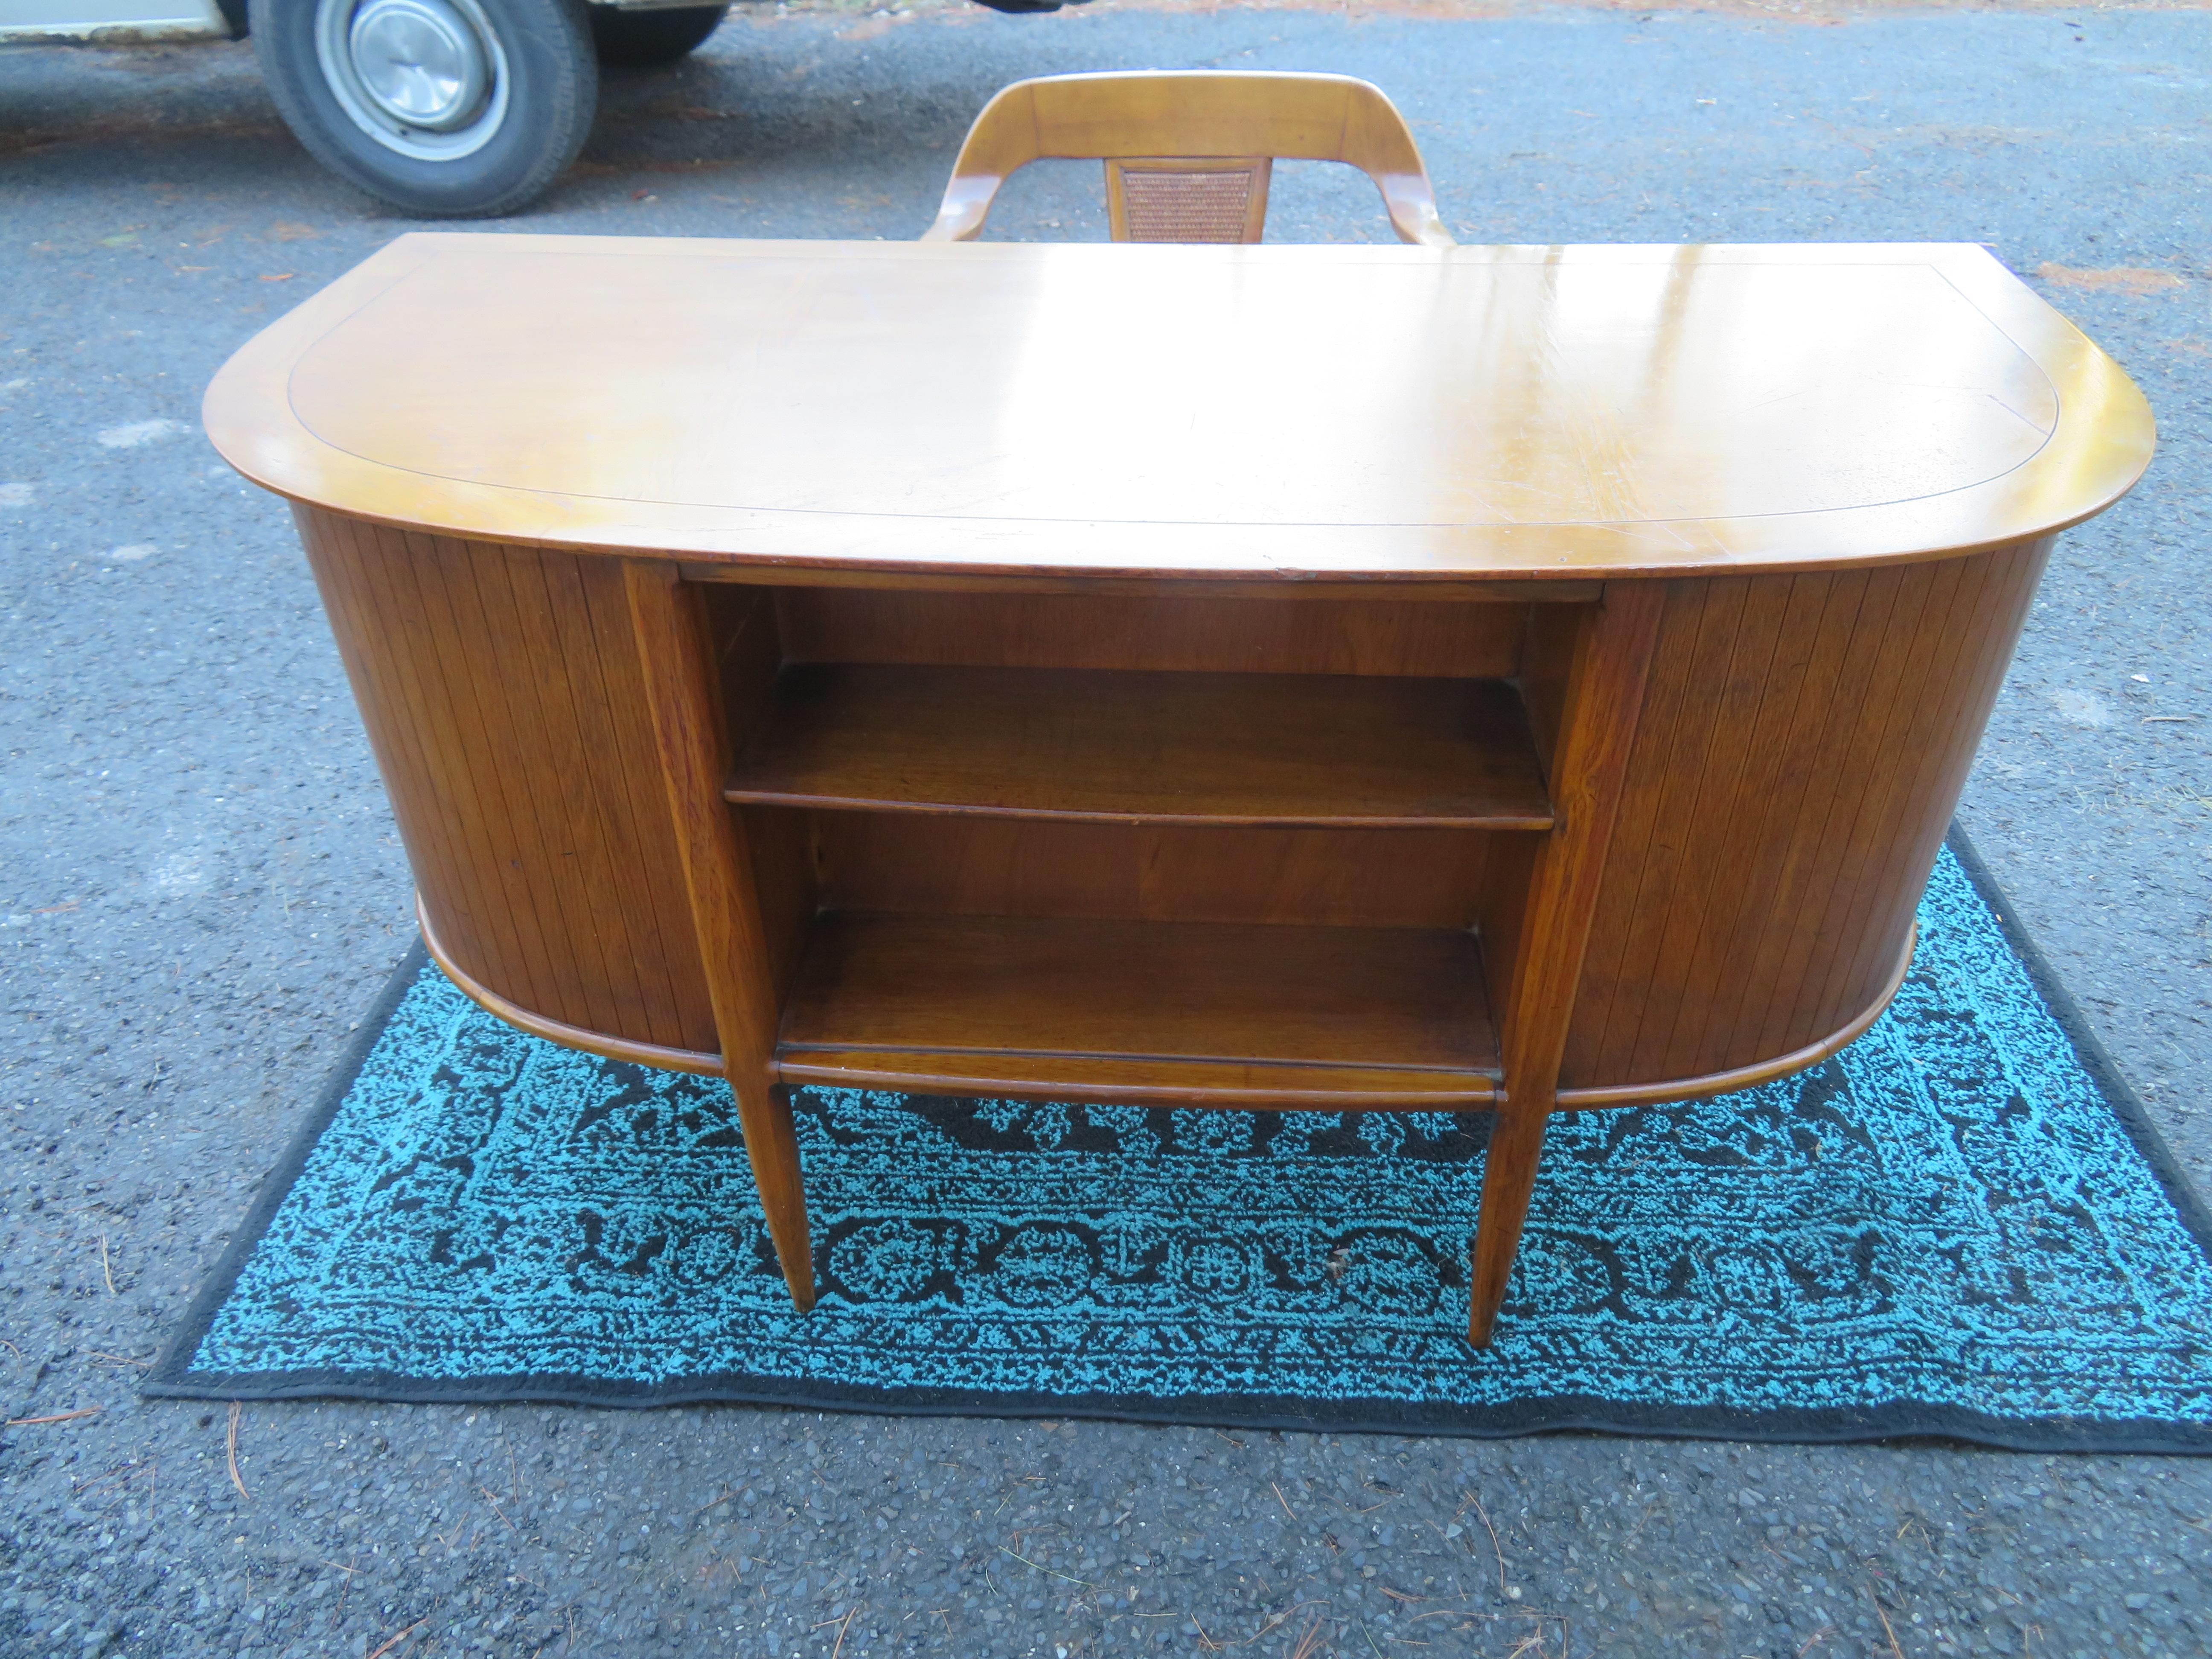 Stunning 1950s walnut desk by John Lubberts & Lambert Mulder for Tomlinson, from the Sophisticates collection. We love the stylish curved front with a built-in bookcase along with the five side drawers and a center drawer. Beautiful figured light